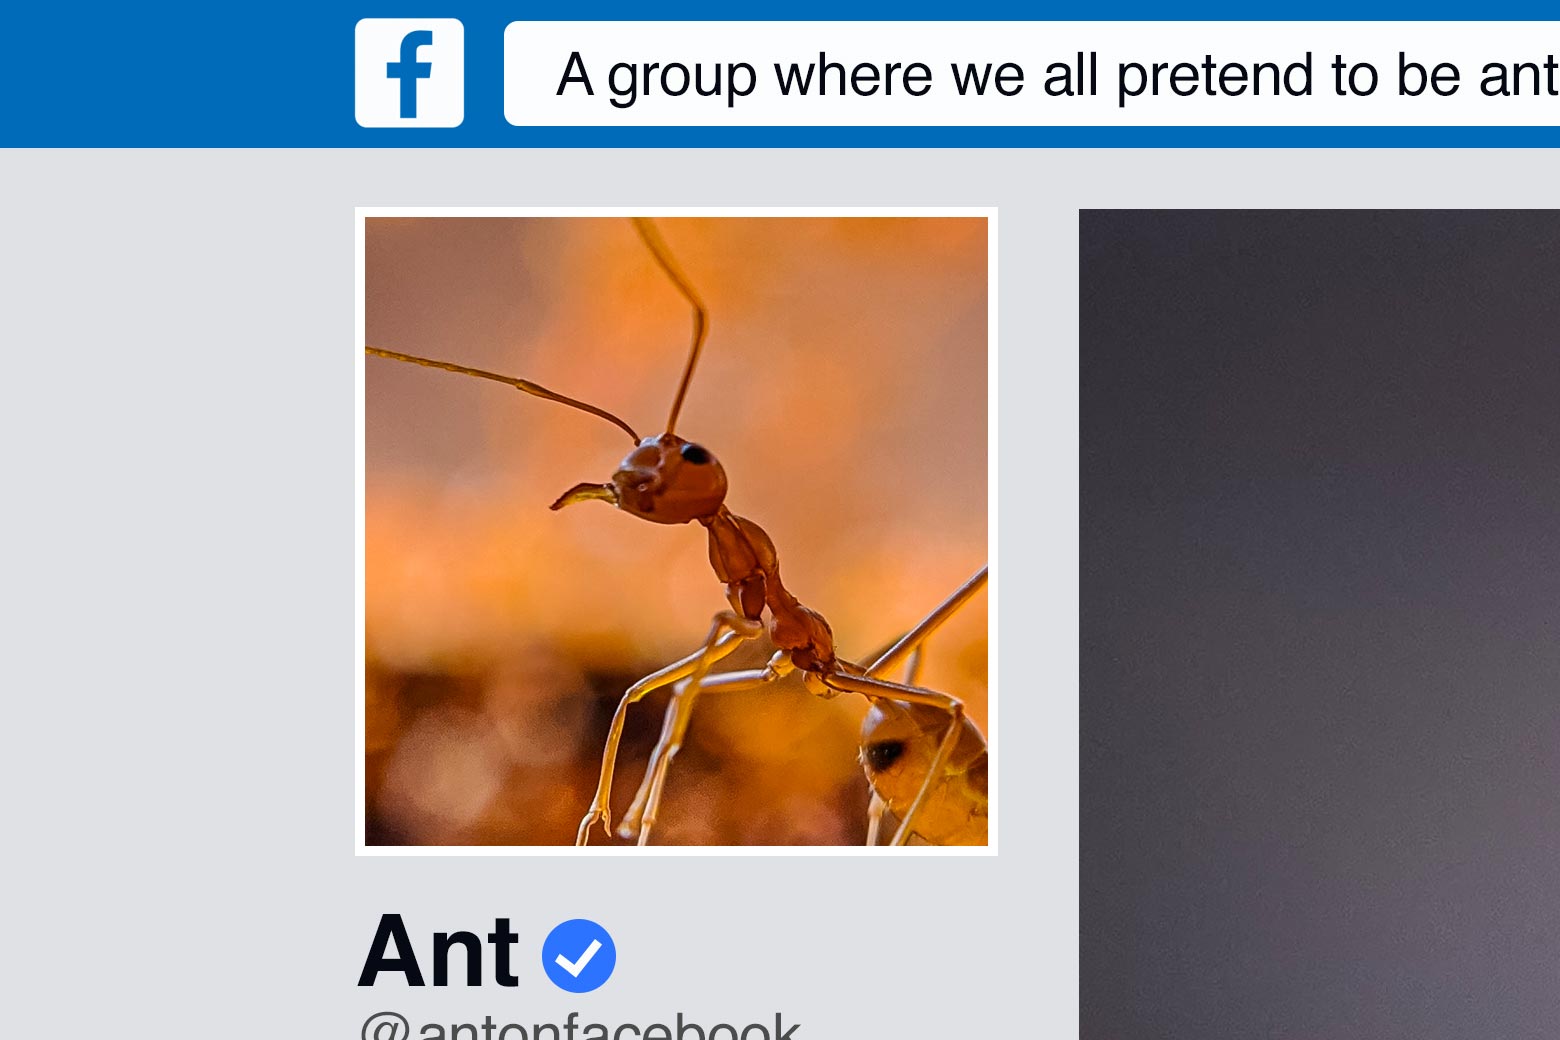 Facebook page of an ant